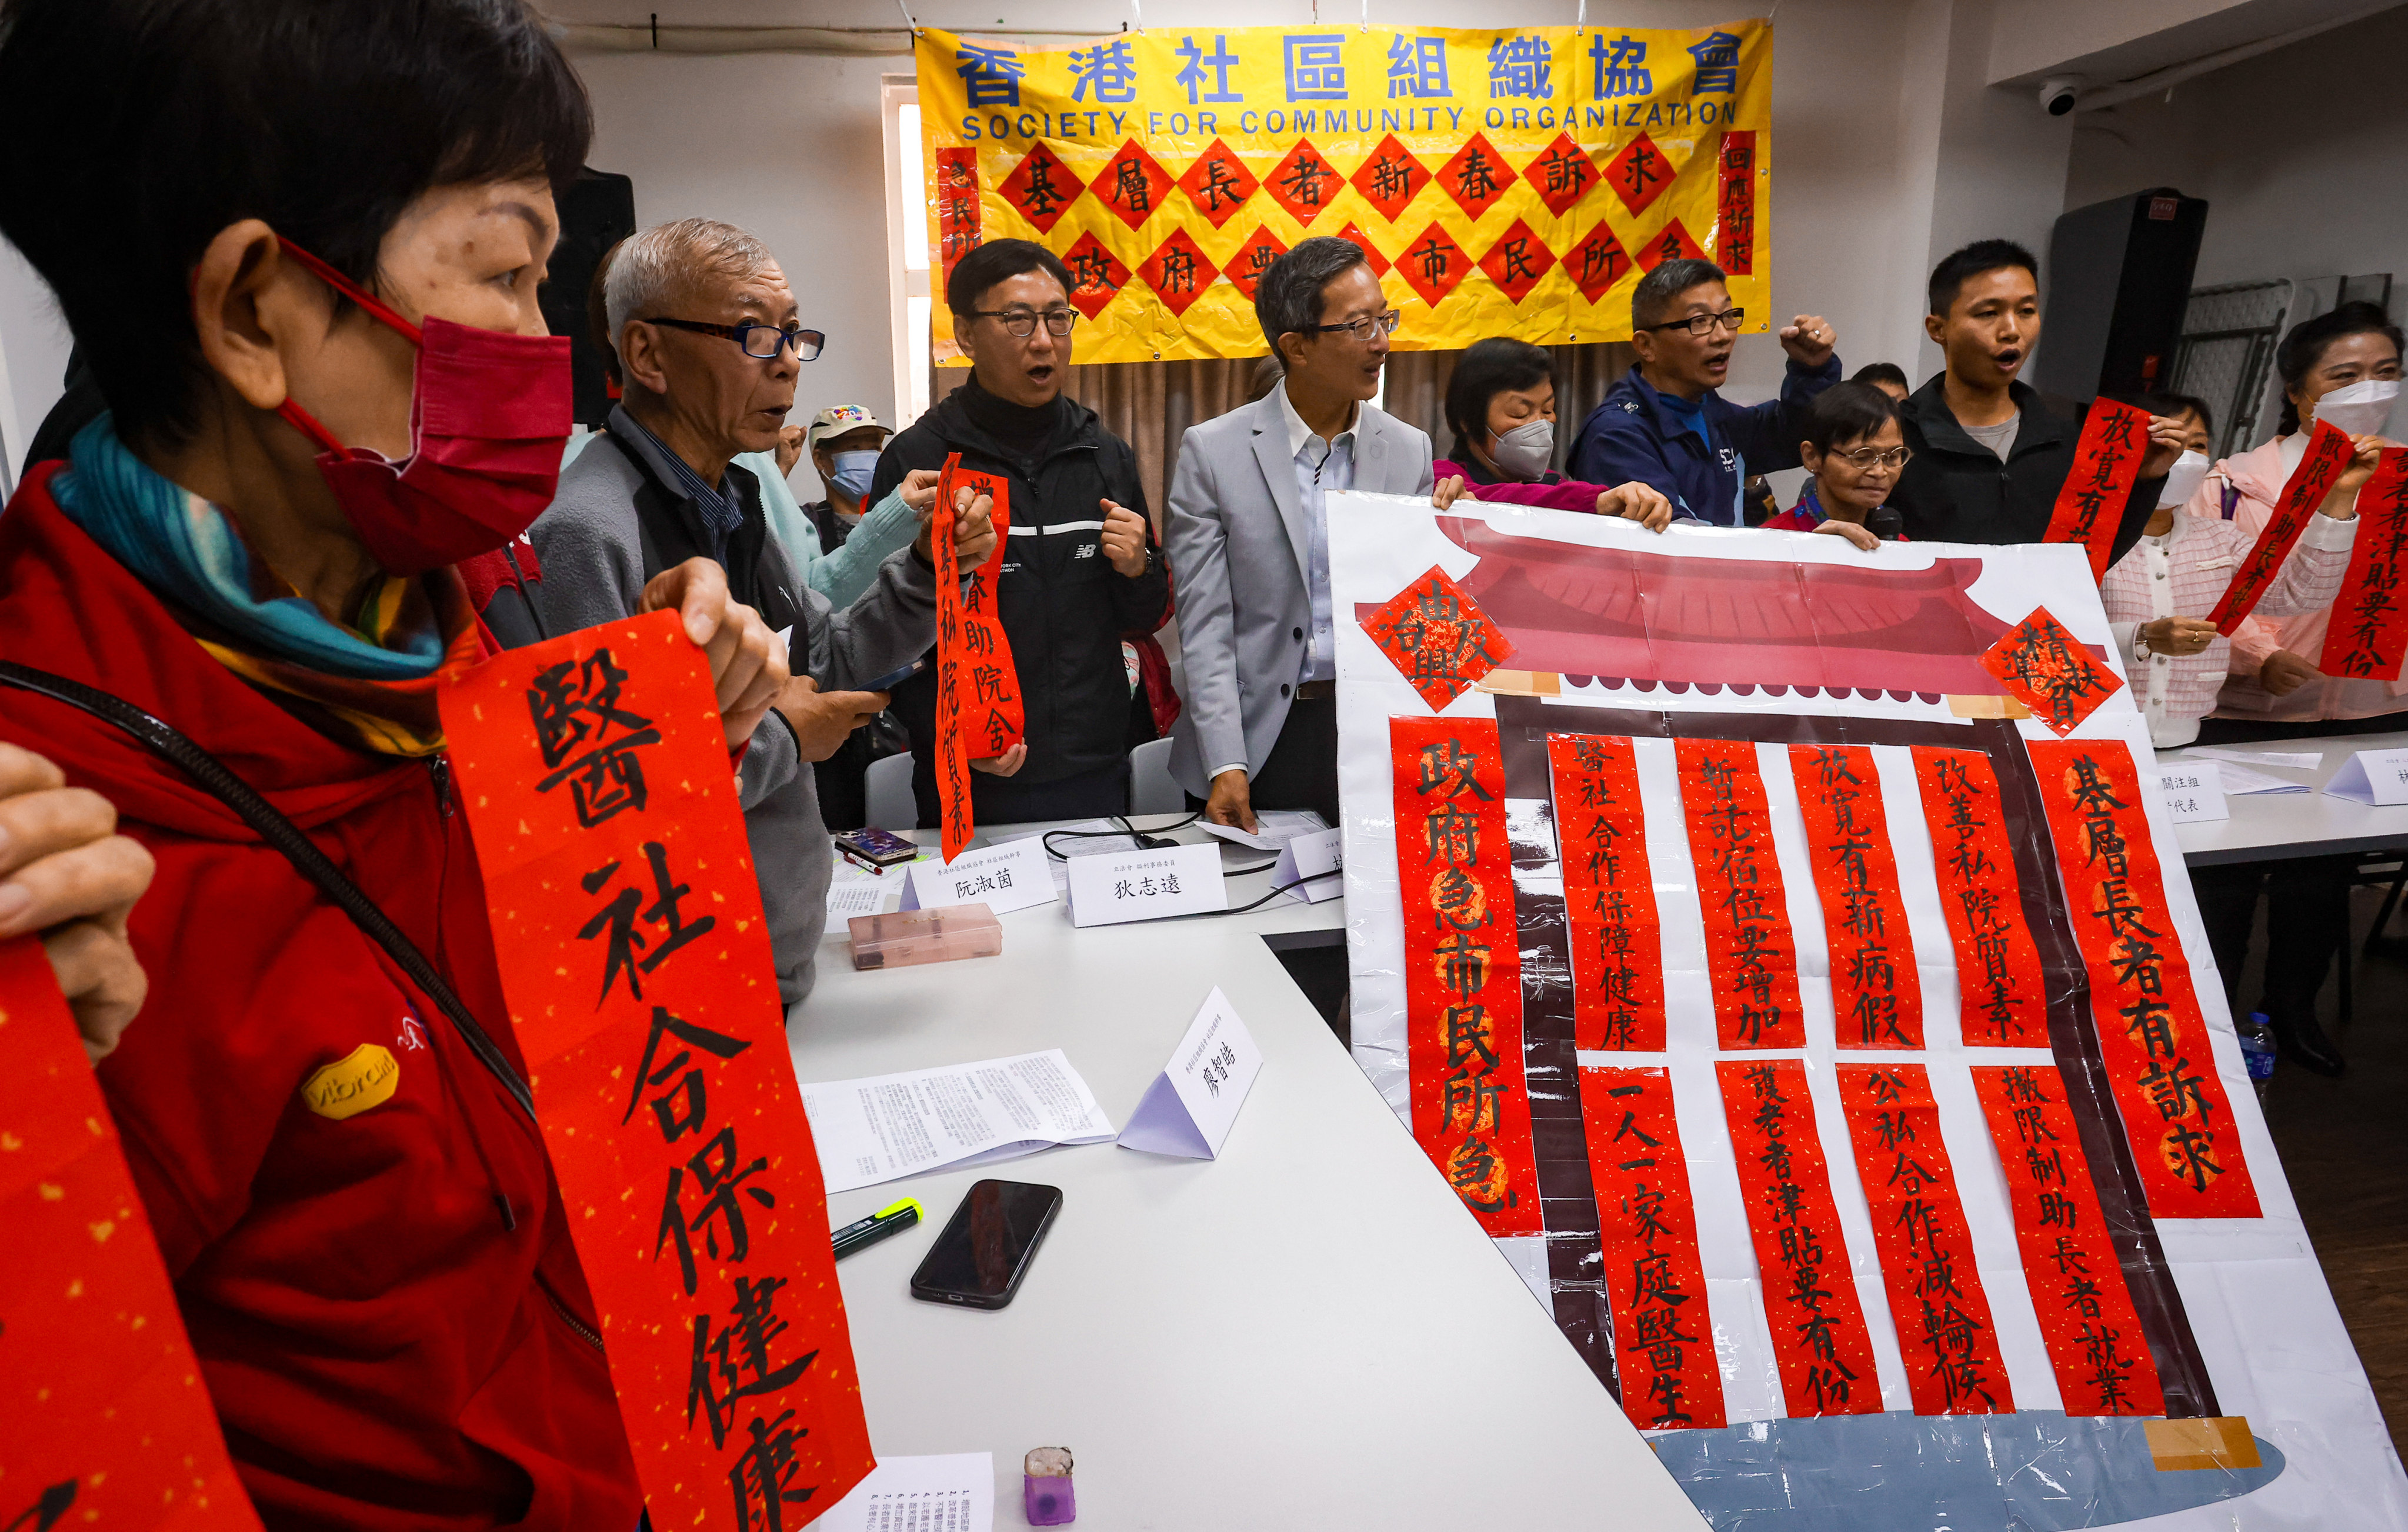 Lawmakers and elderly residents present their concerns at a media event organised by the Society for Community Organisation. Photo: Jonathan Wong